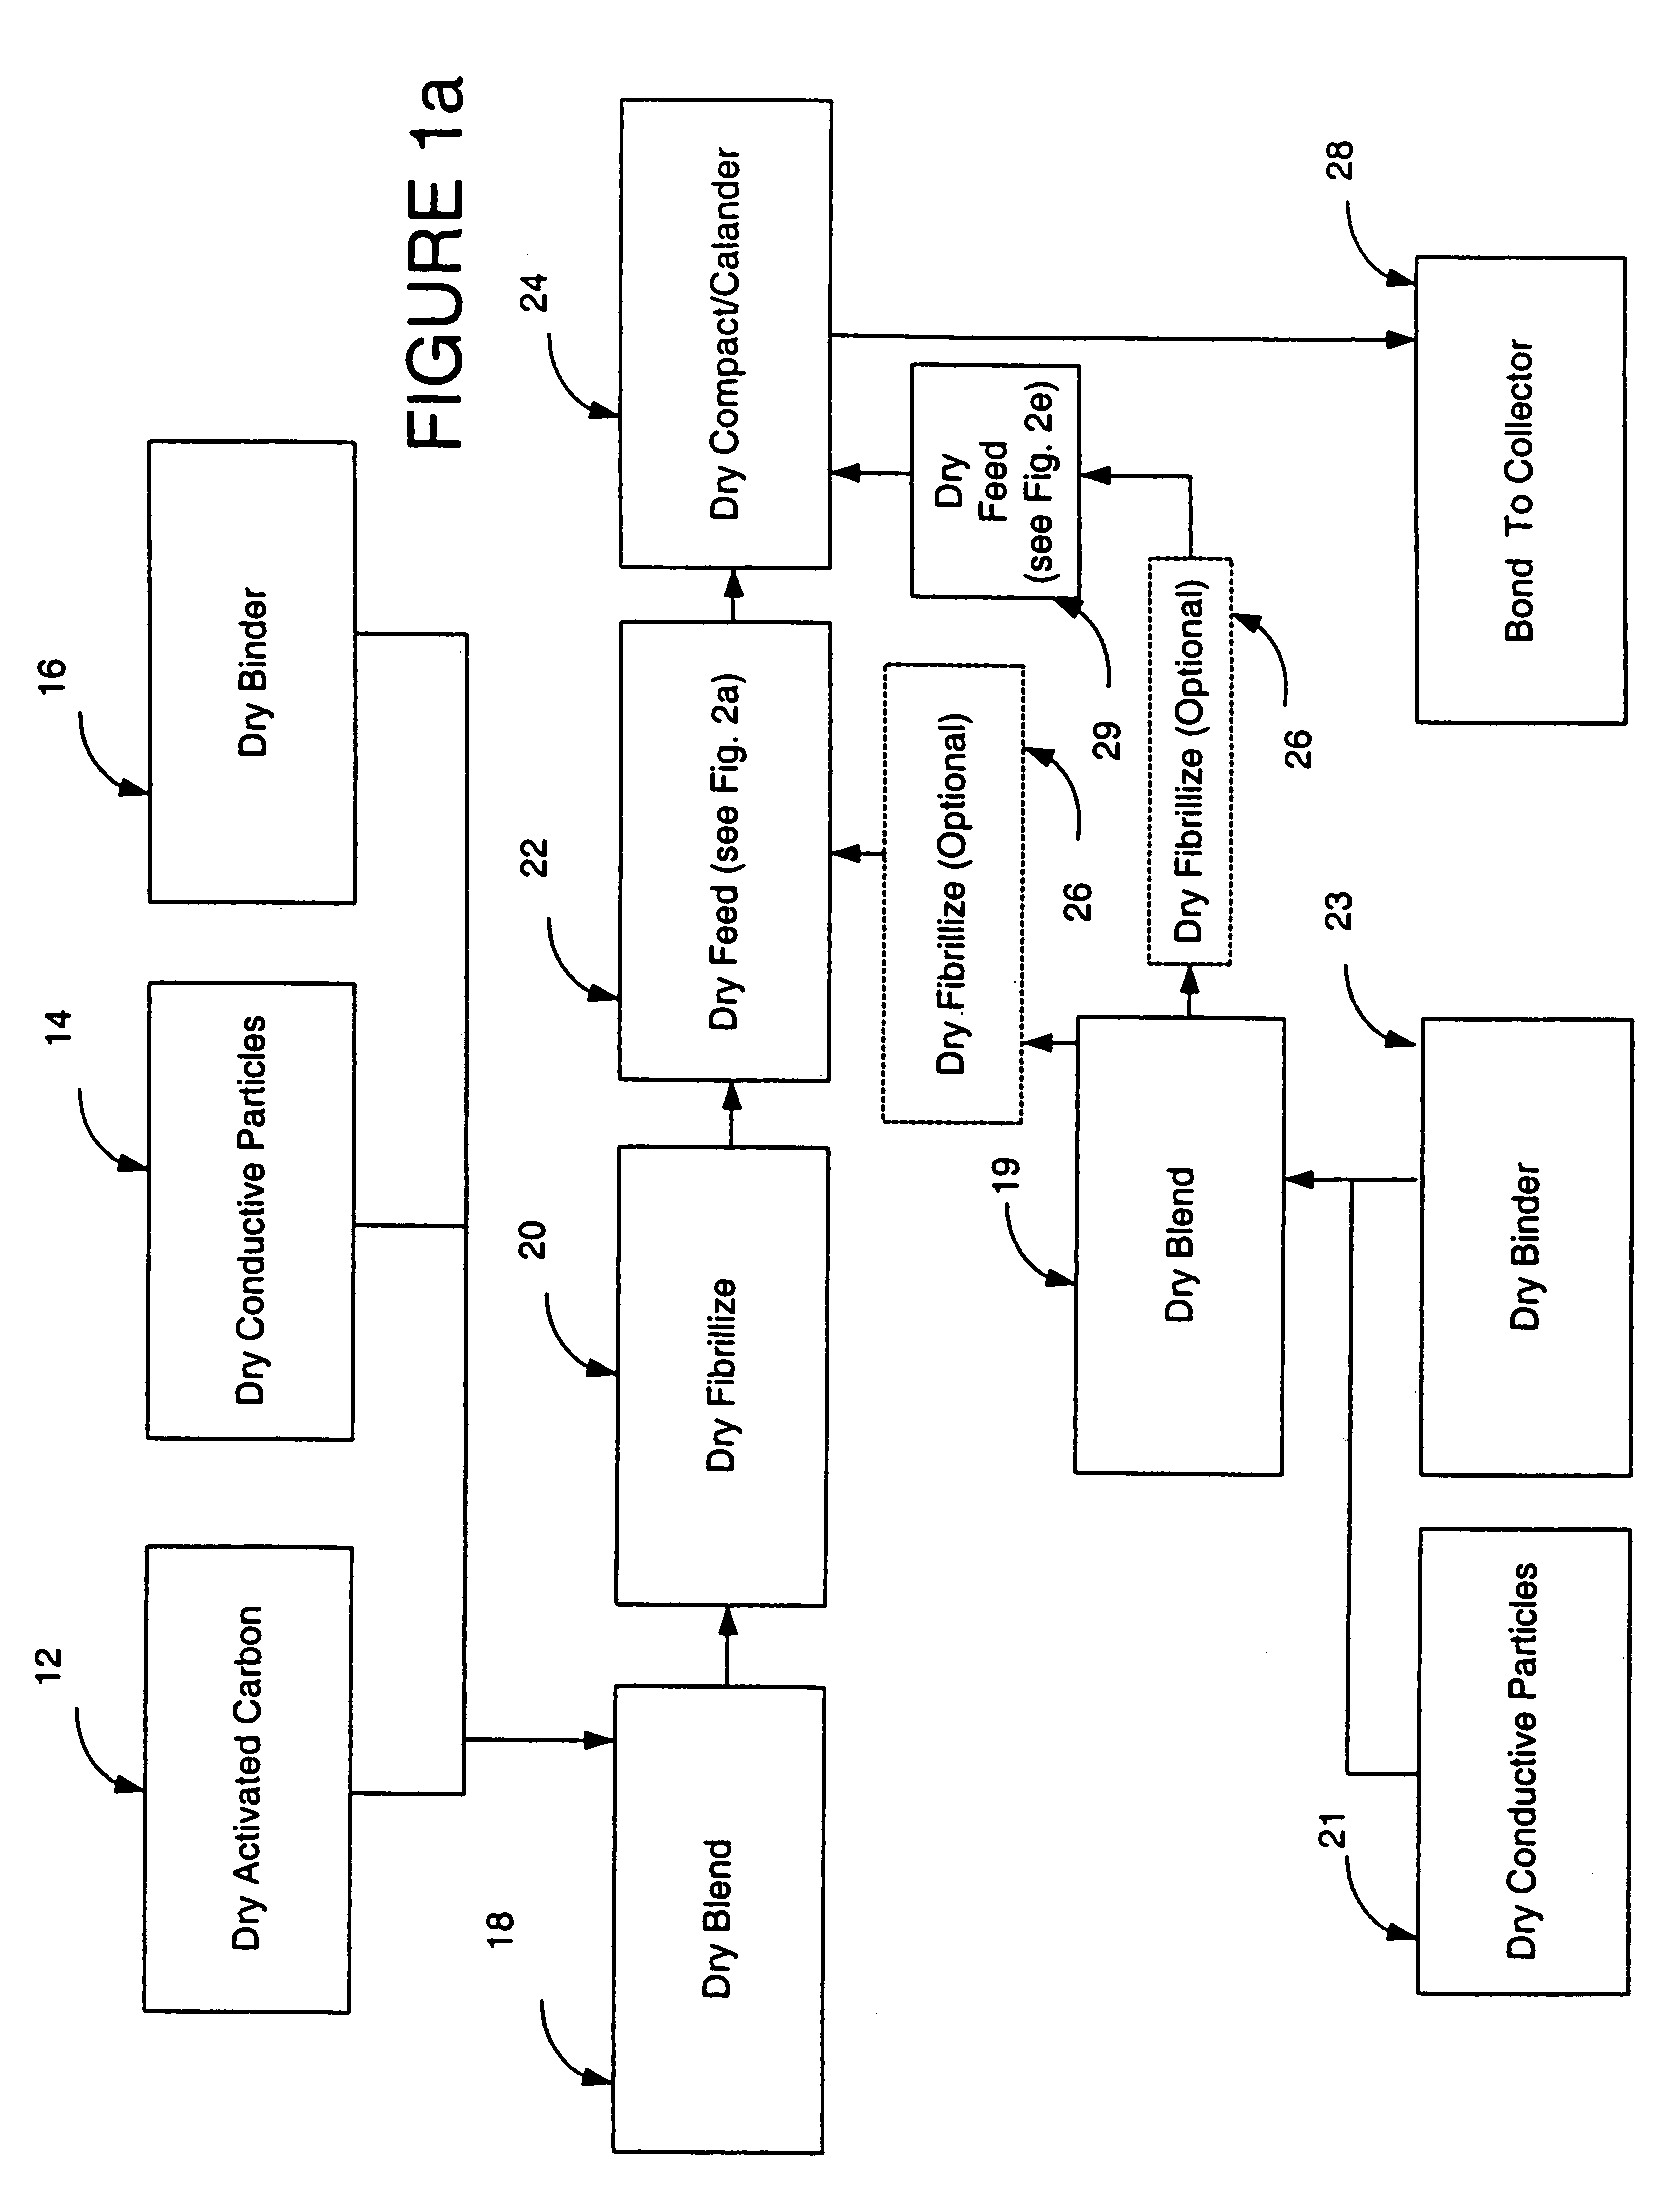 Recyclable dry particle based adhesive electrode and methods of making same